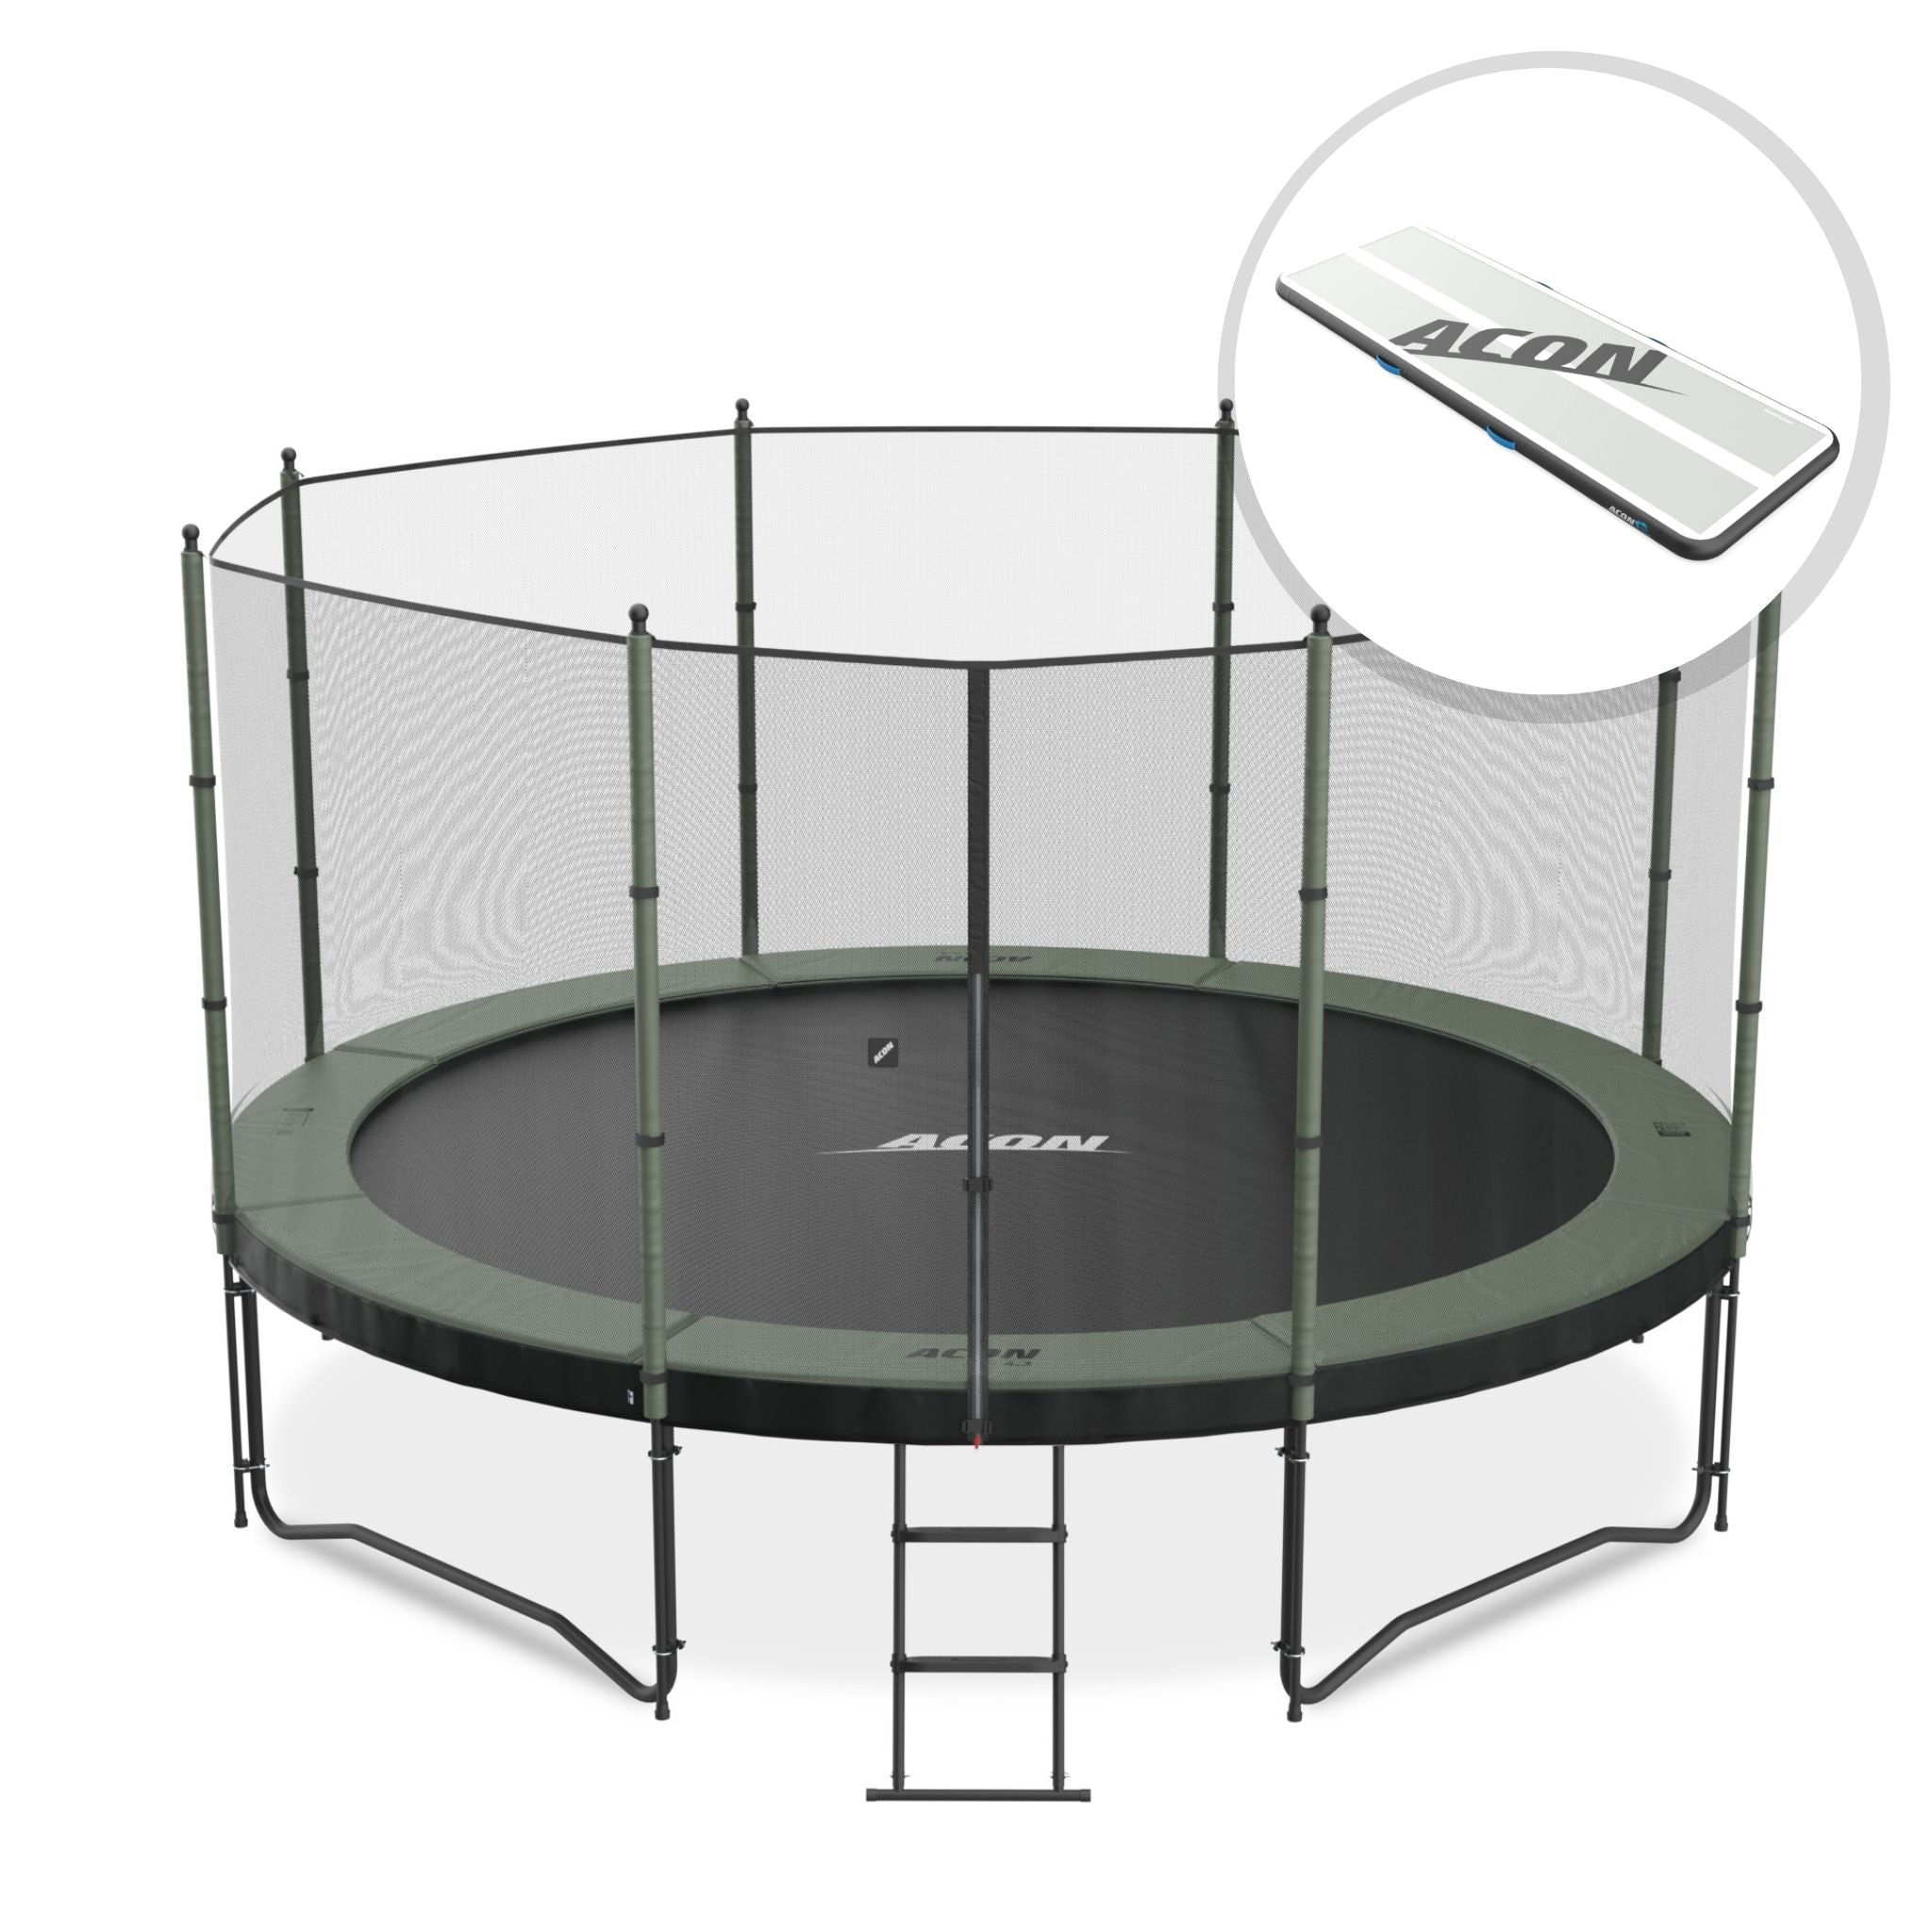 Product image of Acon15ft Round trampoline with Standard net, along with an inset round image of an Acon 10ft airtrack.